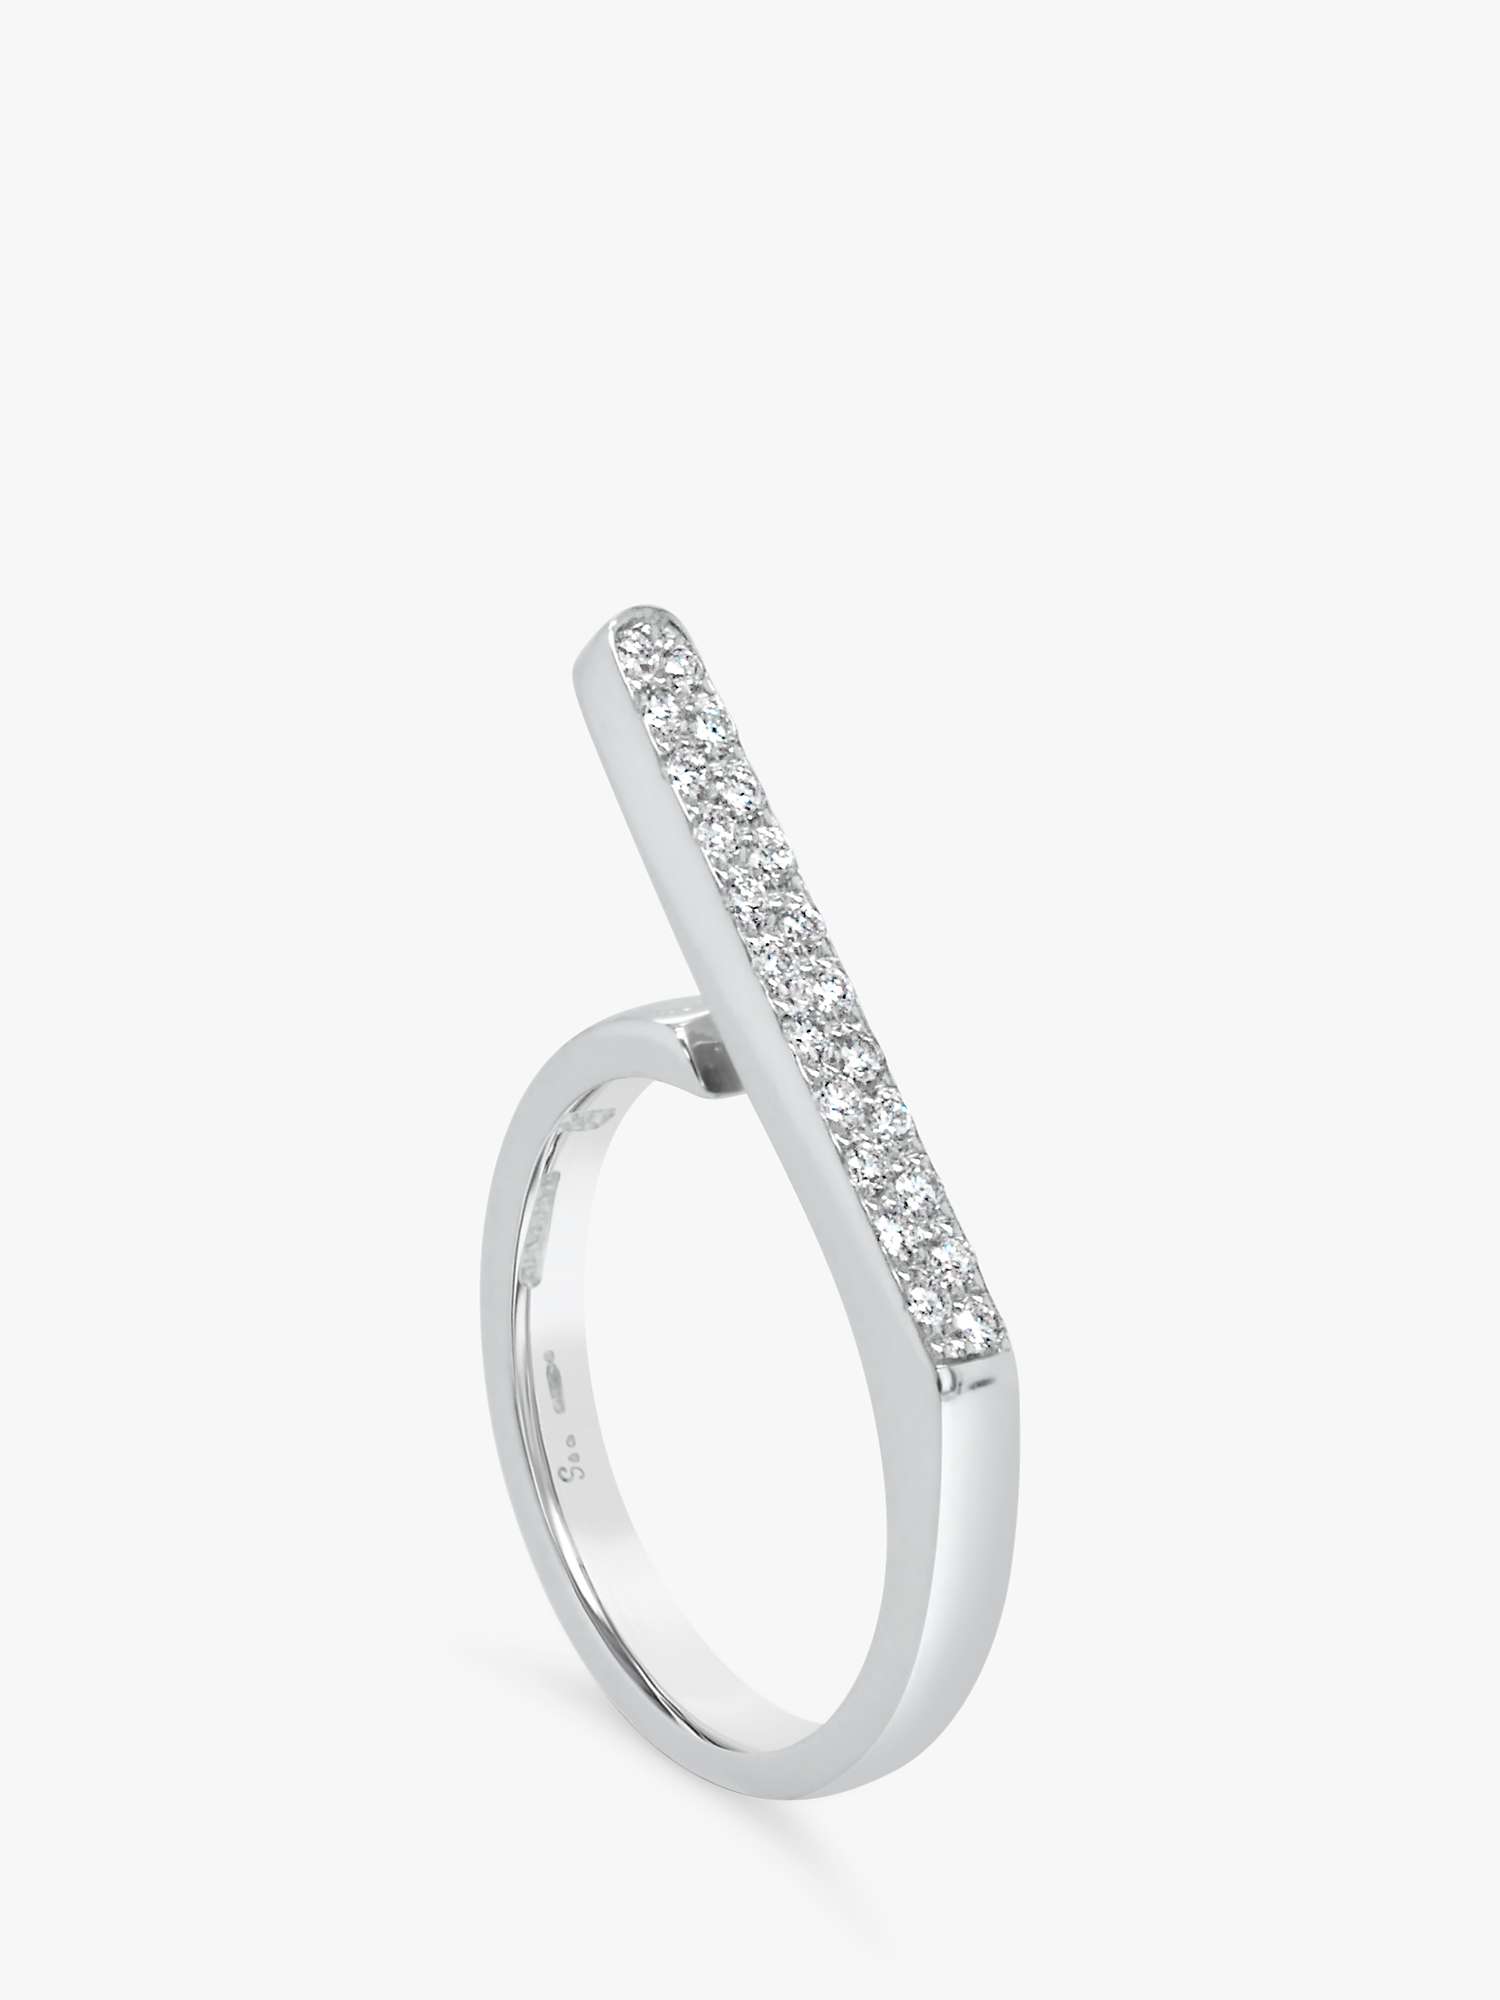 Buy Milton & Humble Jewellery Second Hand Garrard 18ct White Gold Diamond Extended Bar Ring, Dated London 2003 Online at johnlewis.com